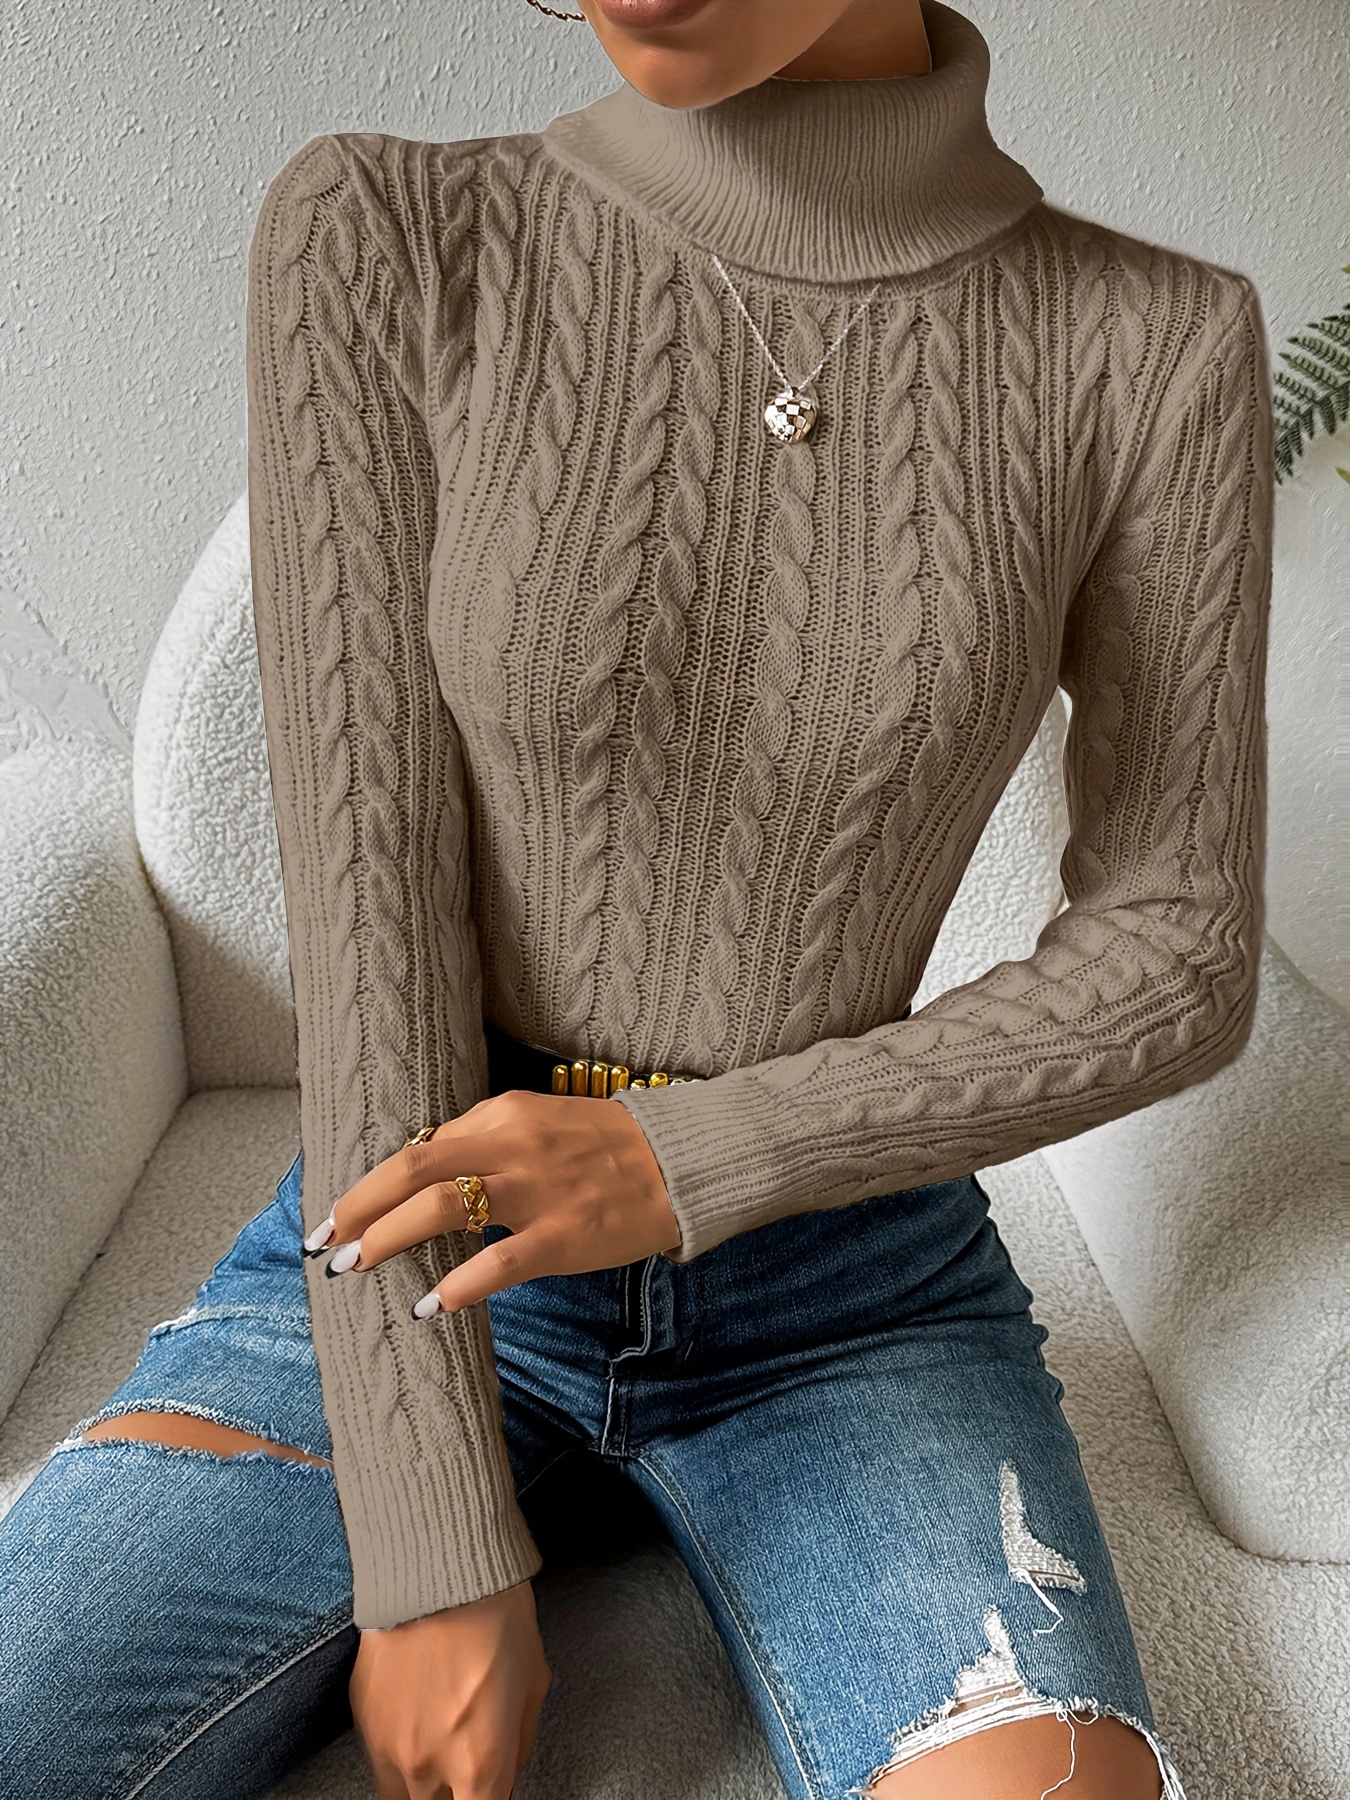 XFLWAM Turtleneck Sweater Women Oversized Cowl Neck Sweater Cable Knit Long  Sleeve Pullover Tops Orange L 